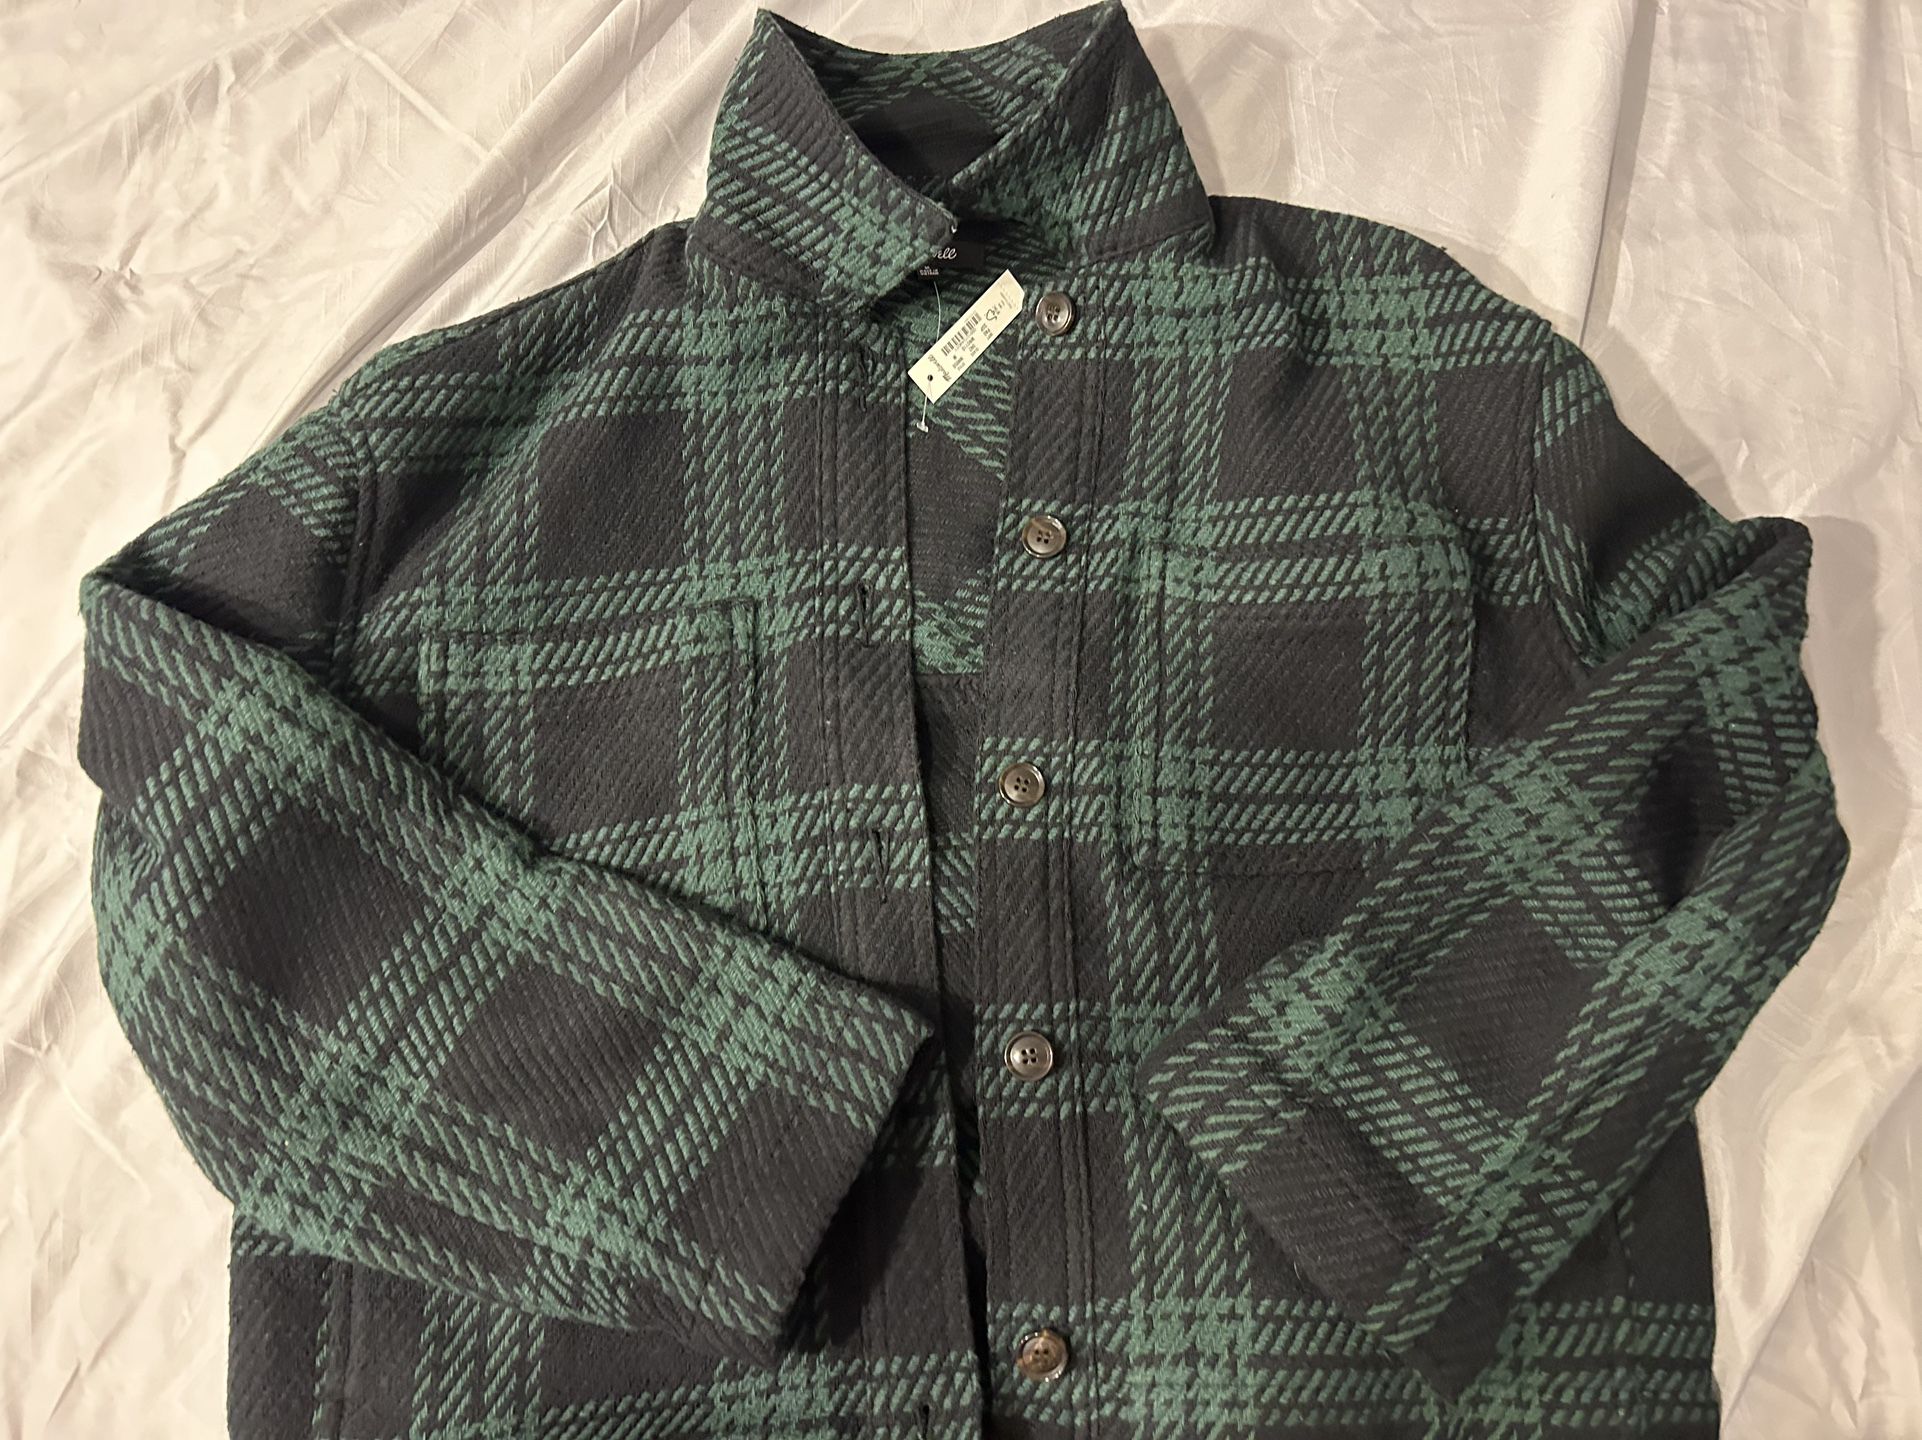 NWT MADEWELL Flannel Boxy Shirt-Jacket in Plaid